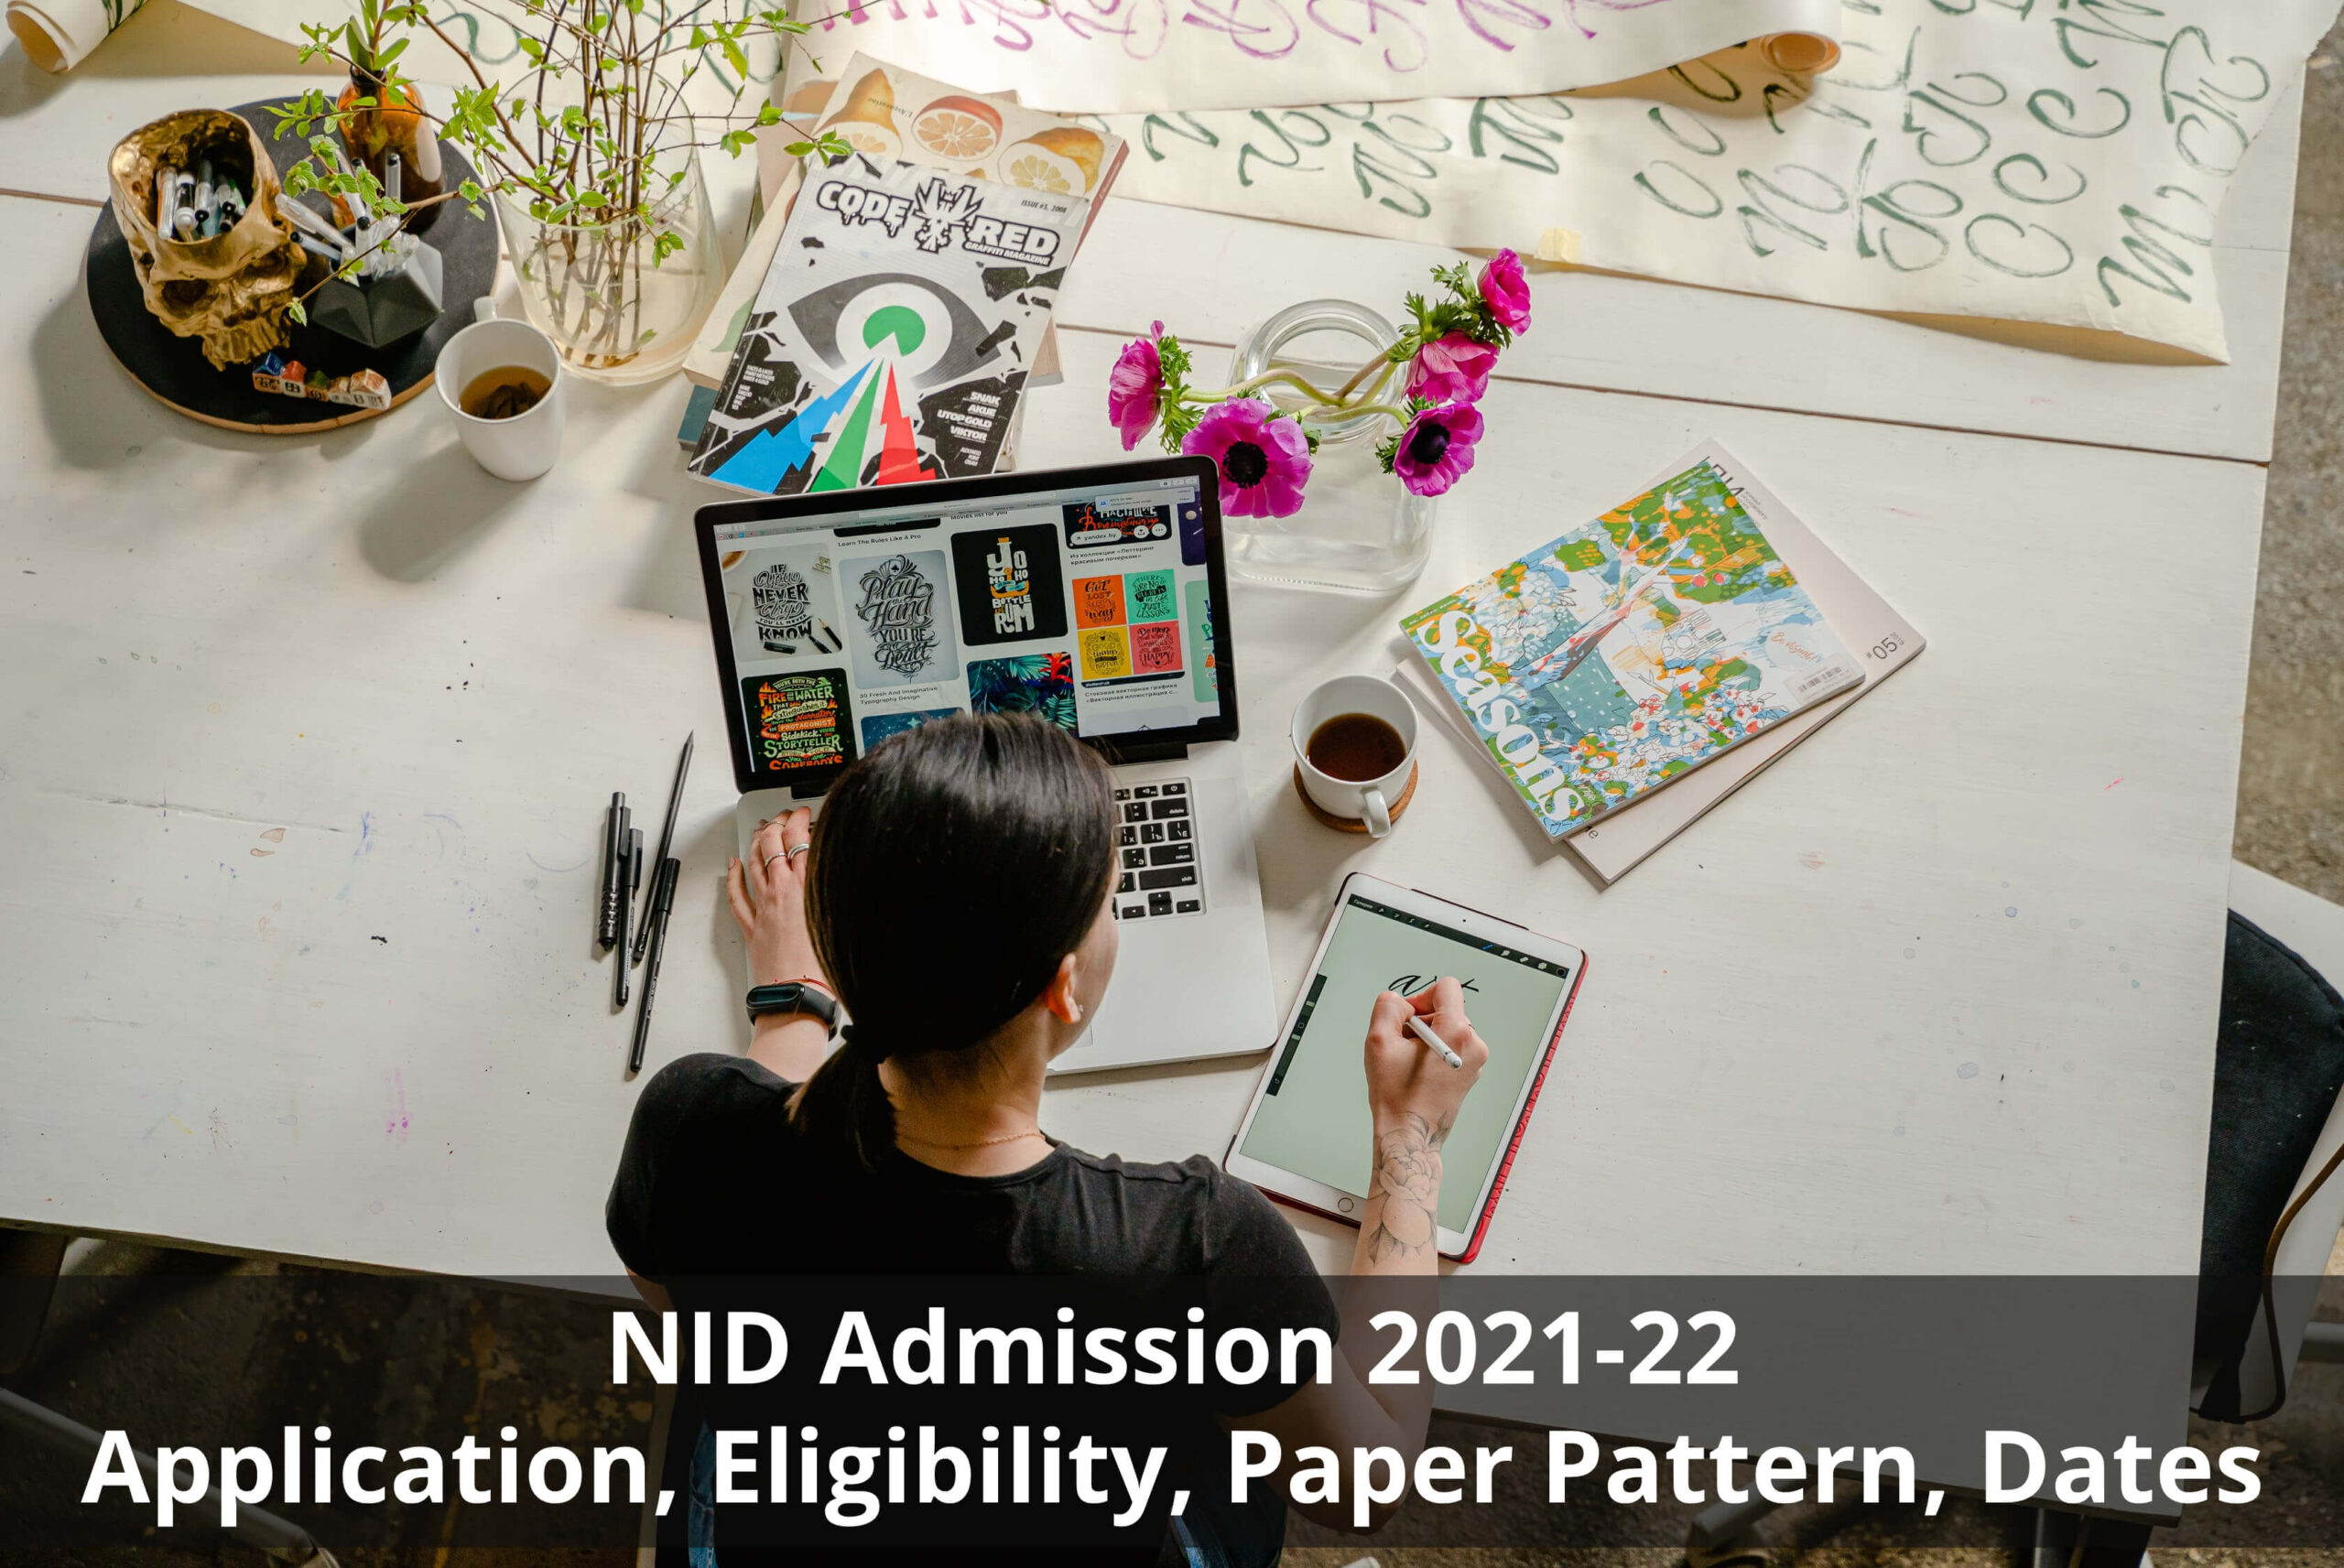 All about NID Admission 2021-22: Application, Eligibility, Paper Pattern, Dates